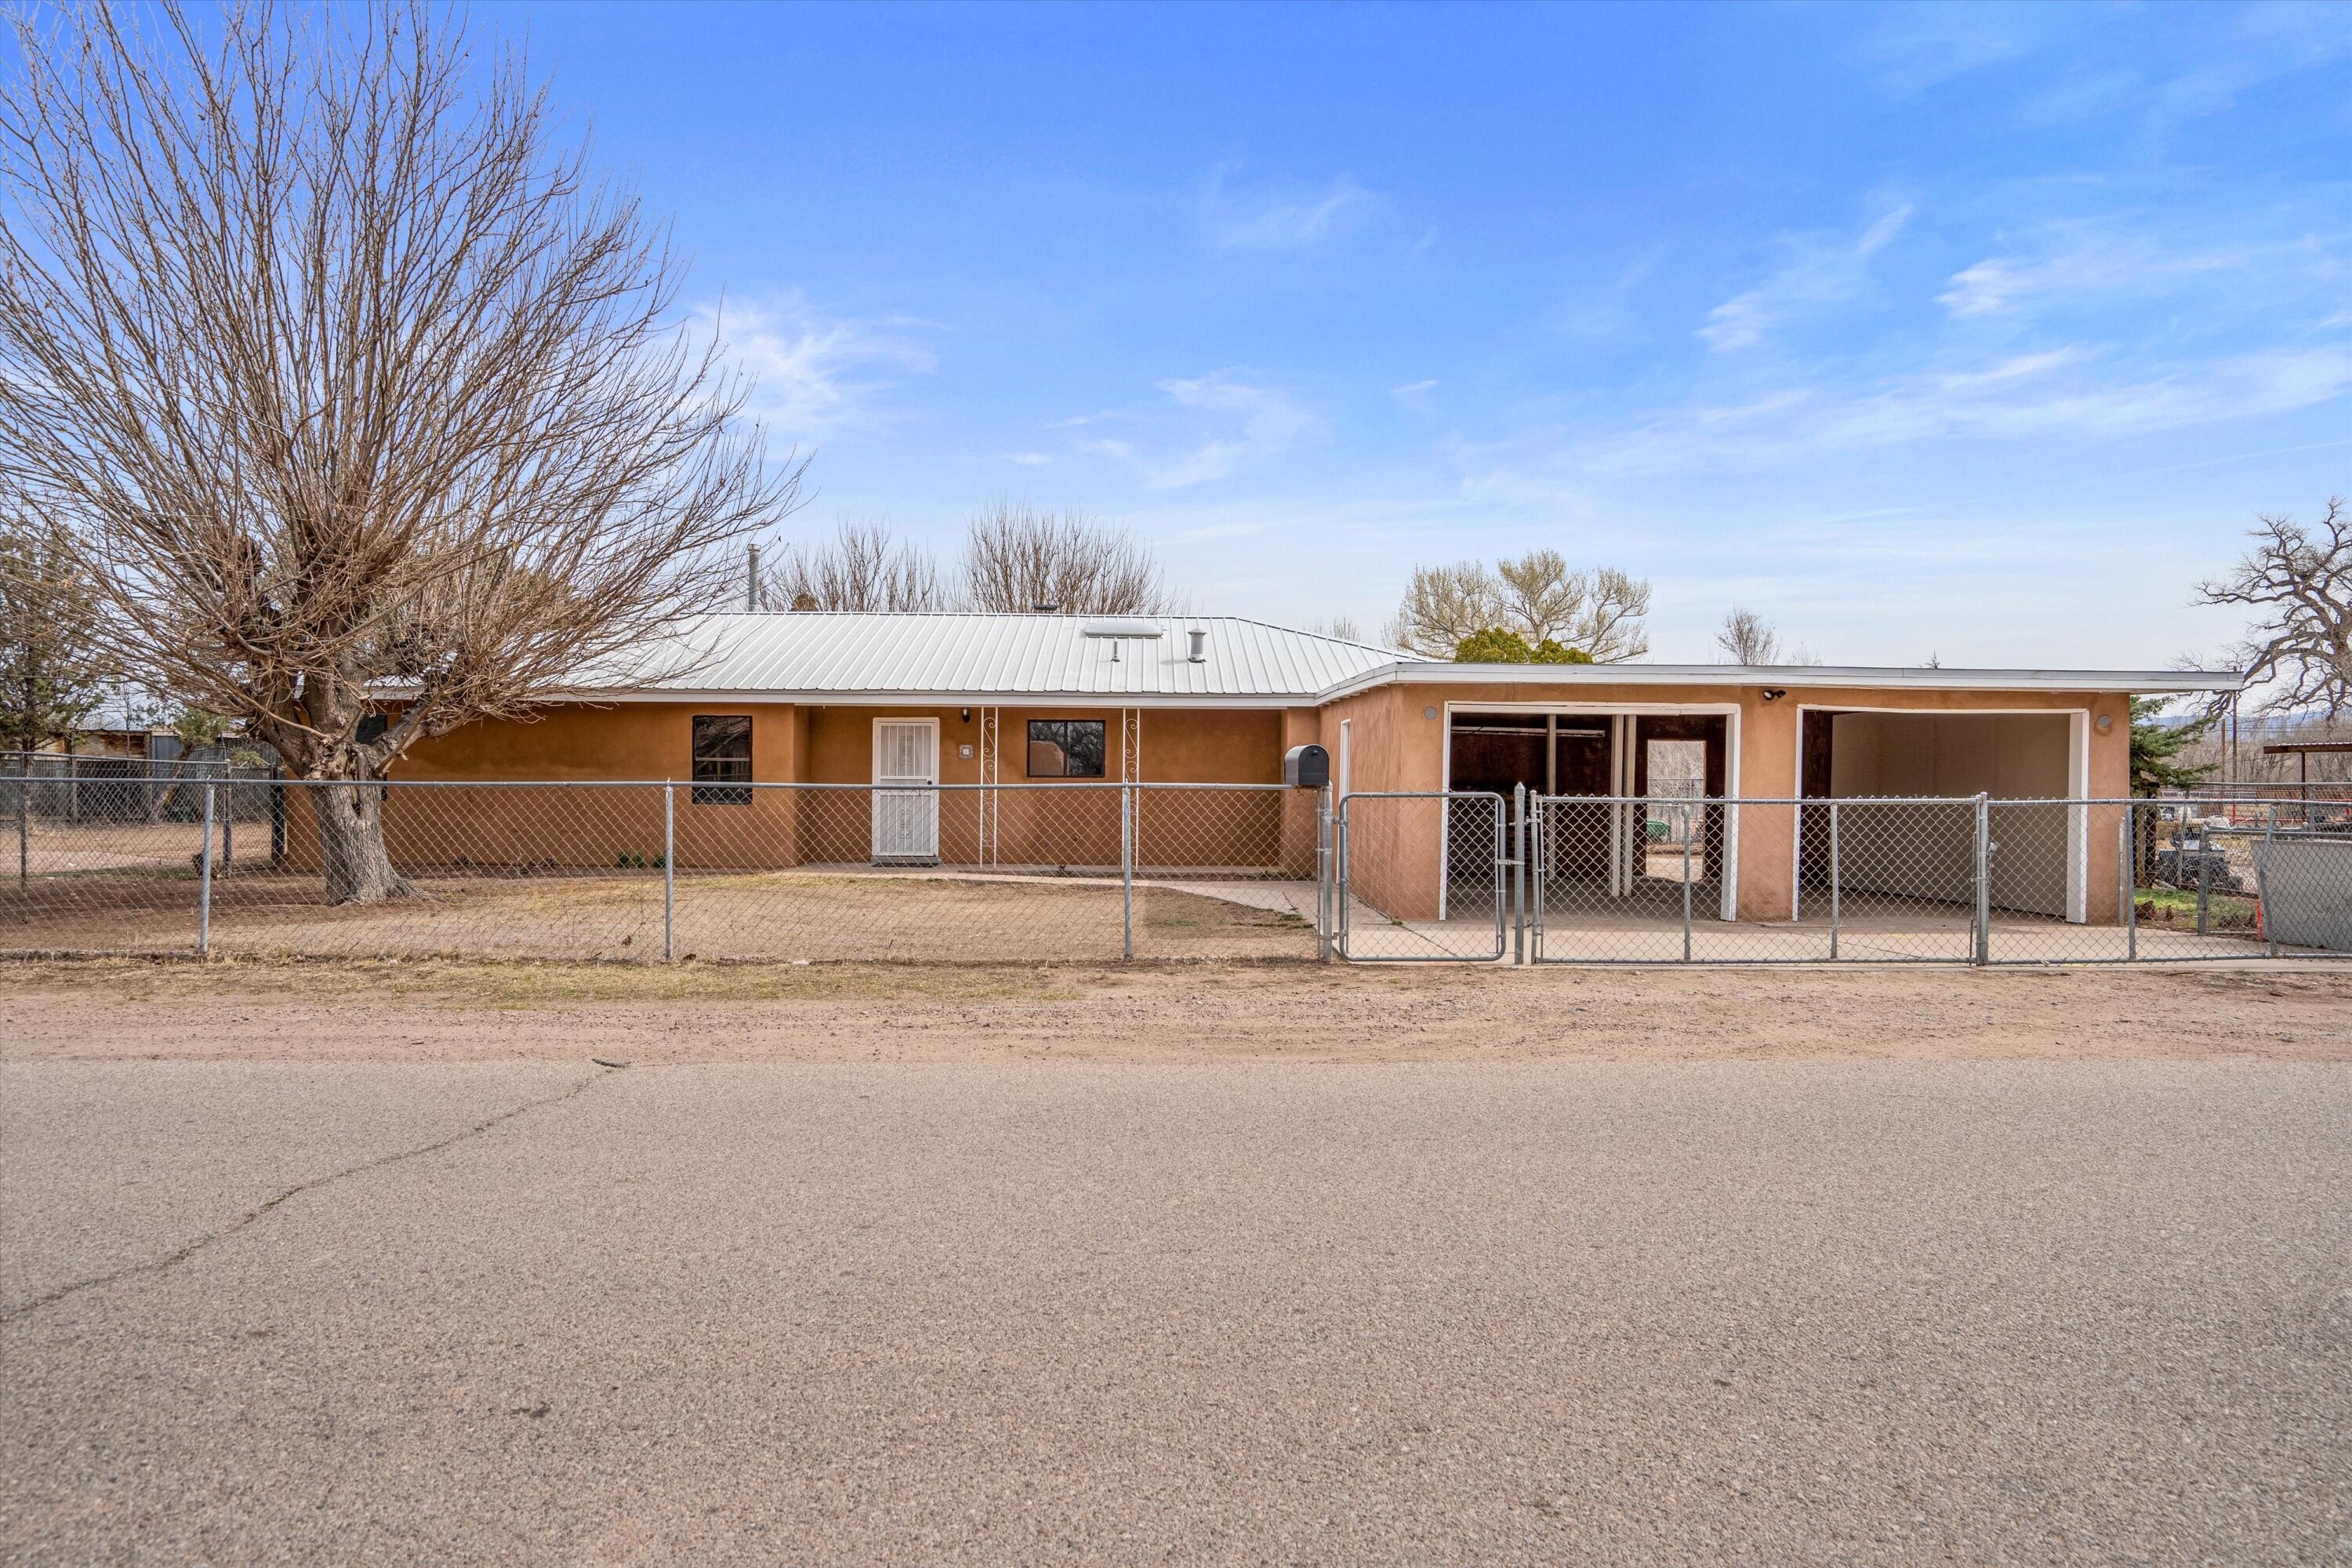 4 Terry Drive, Los Lunas, New Mexico 87031, 4 Bedrooms Bedrooms, ,2 BathroomsBathrooms,Residential,For Sale,4 Terry Drive,1058399